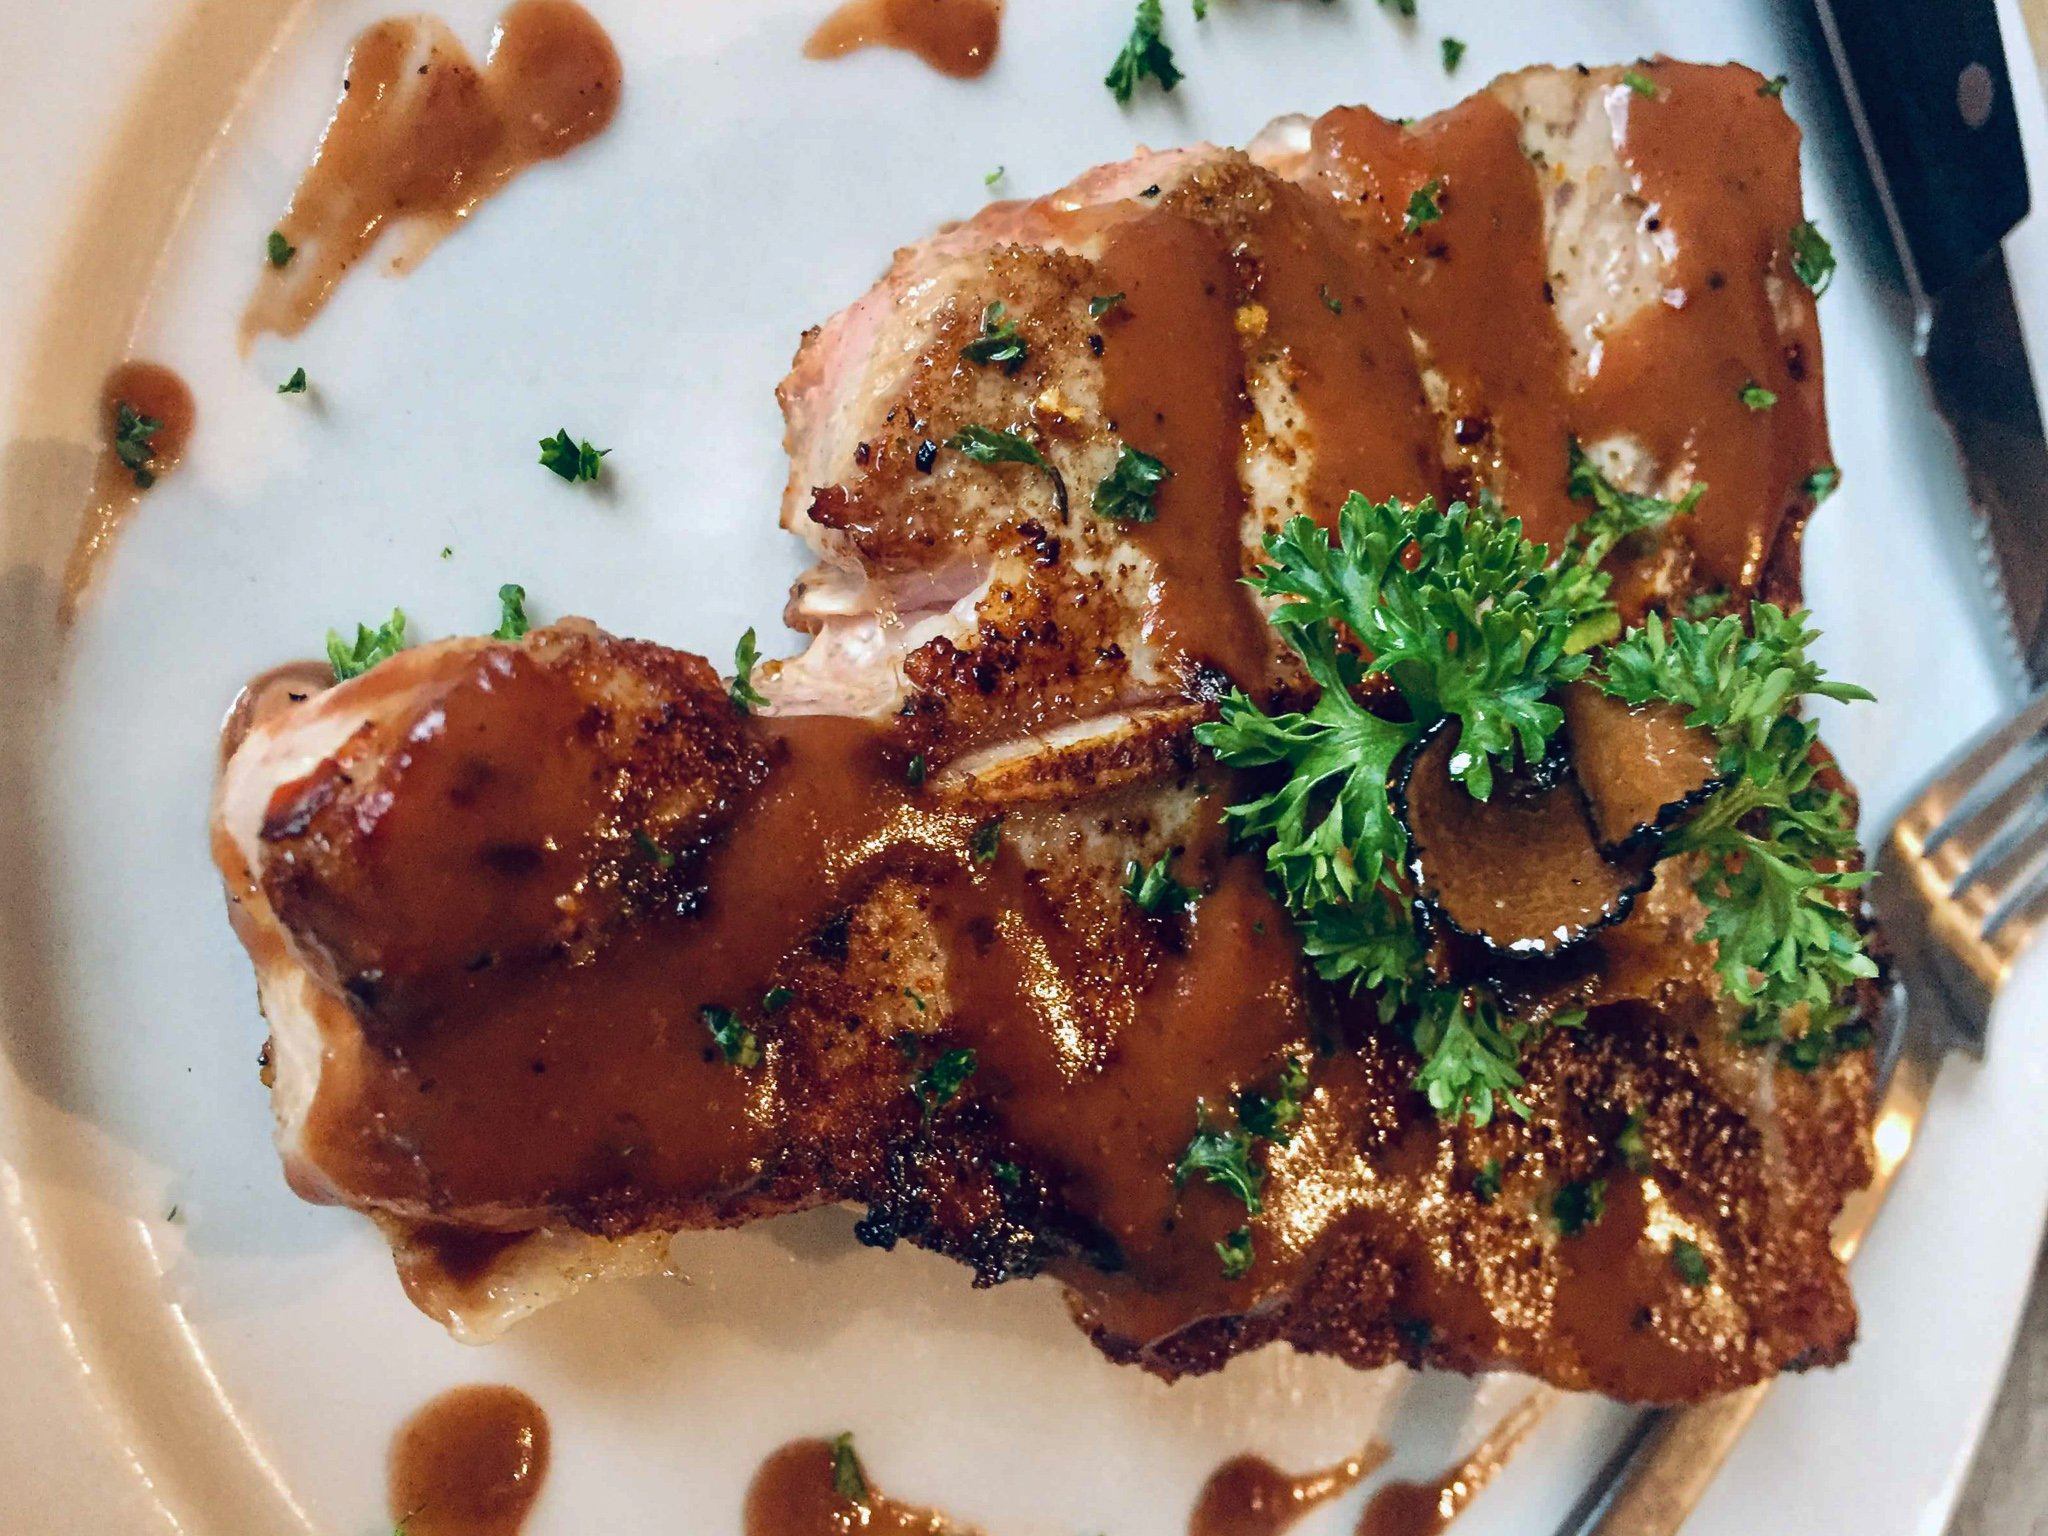 Black Truffle Sauce Served Over Bone-In Veal Chops